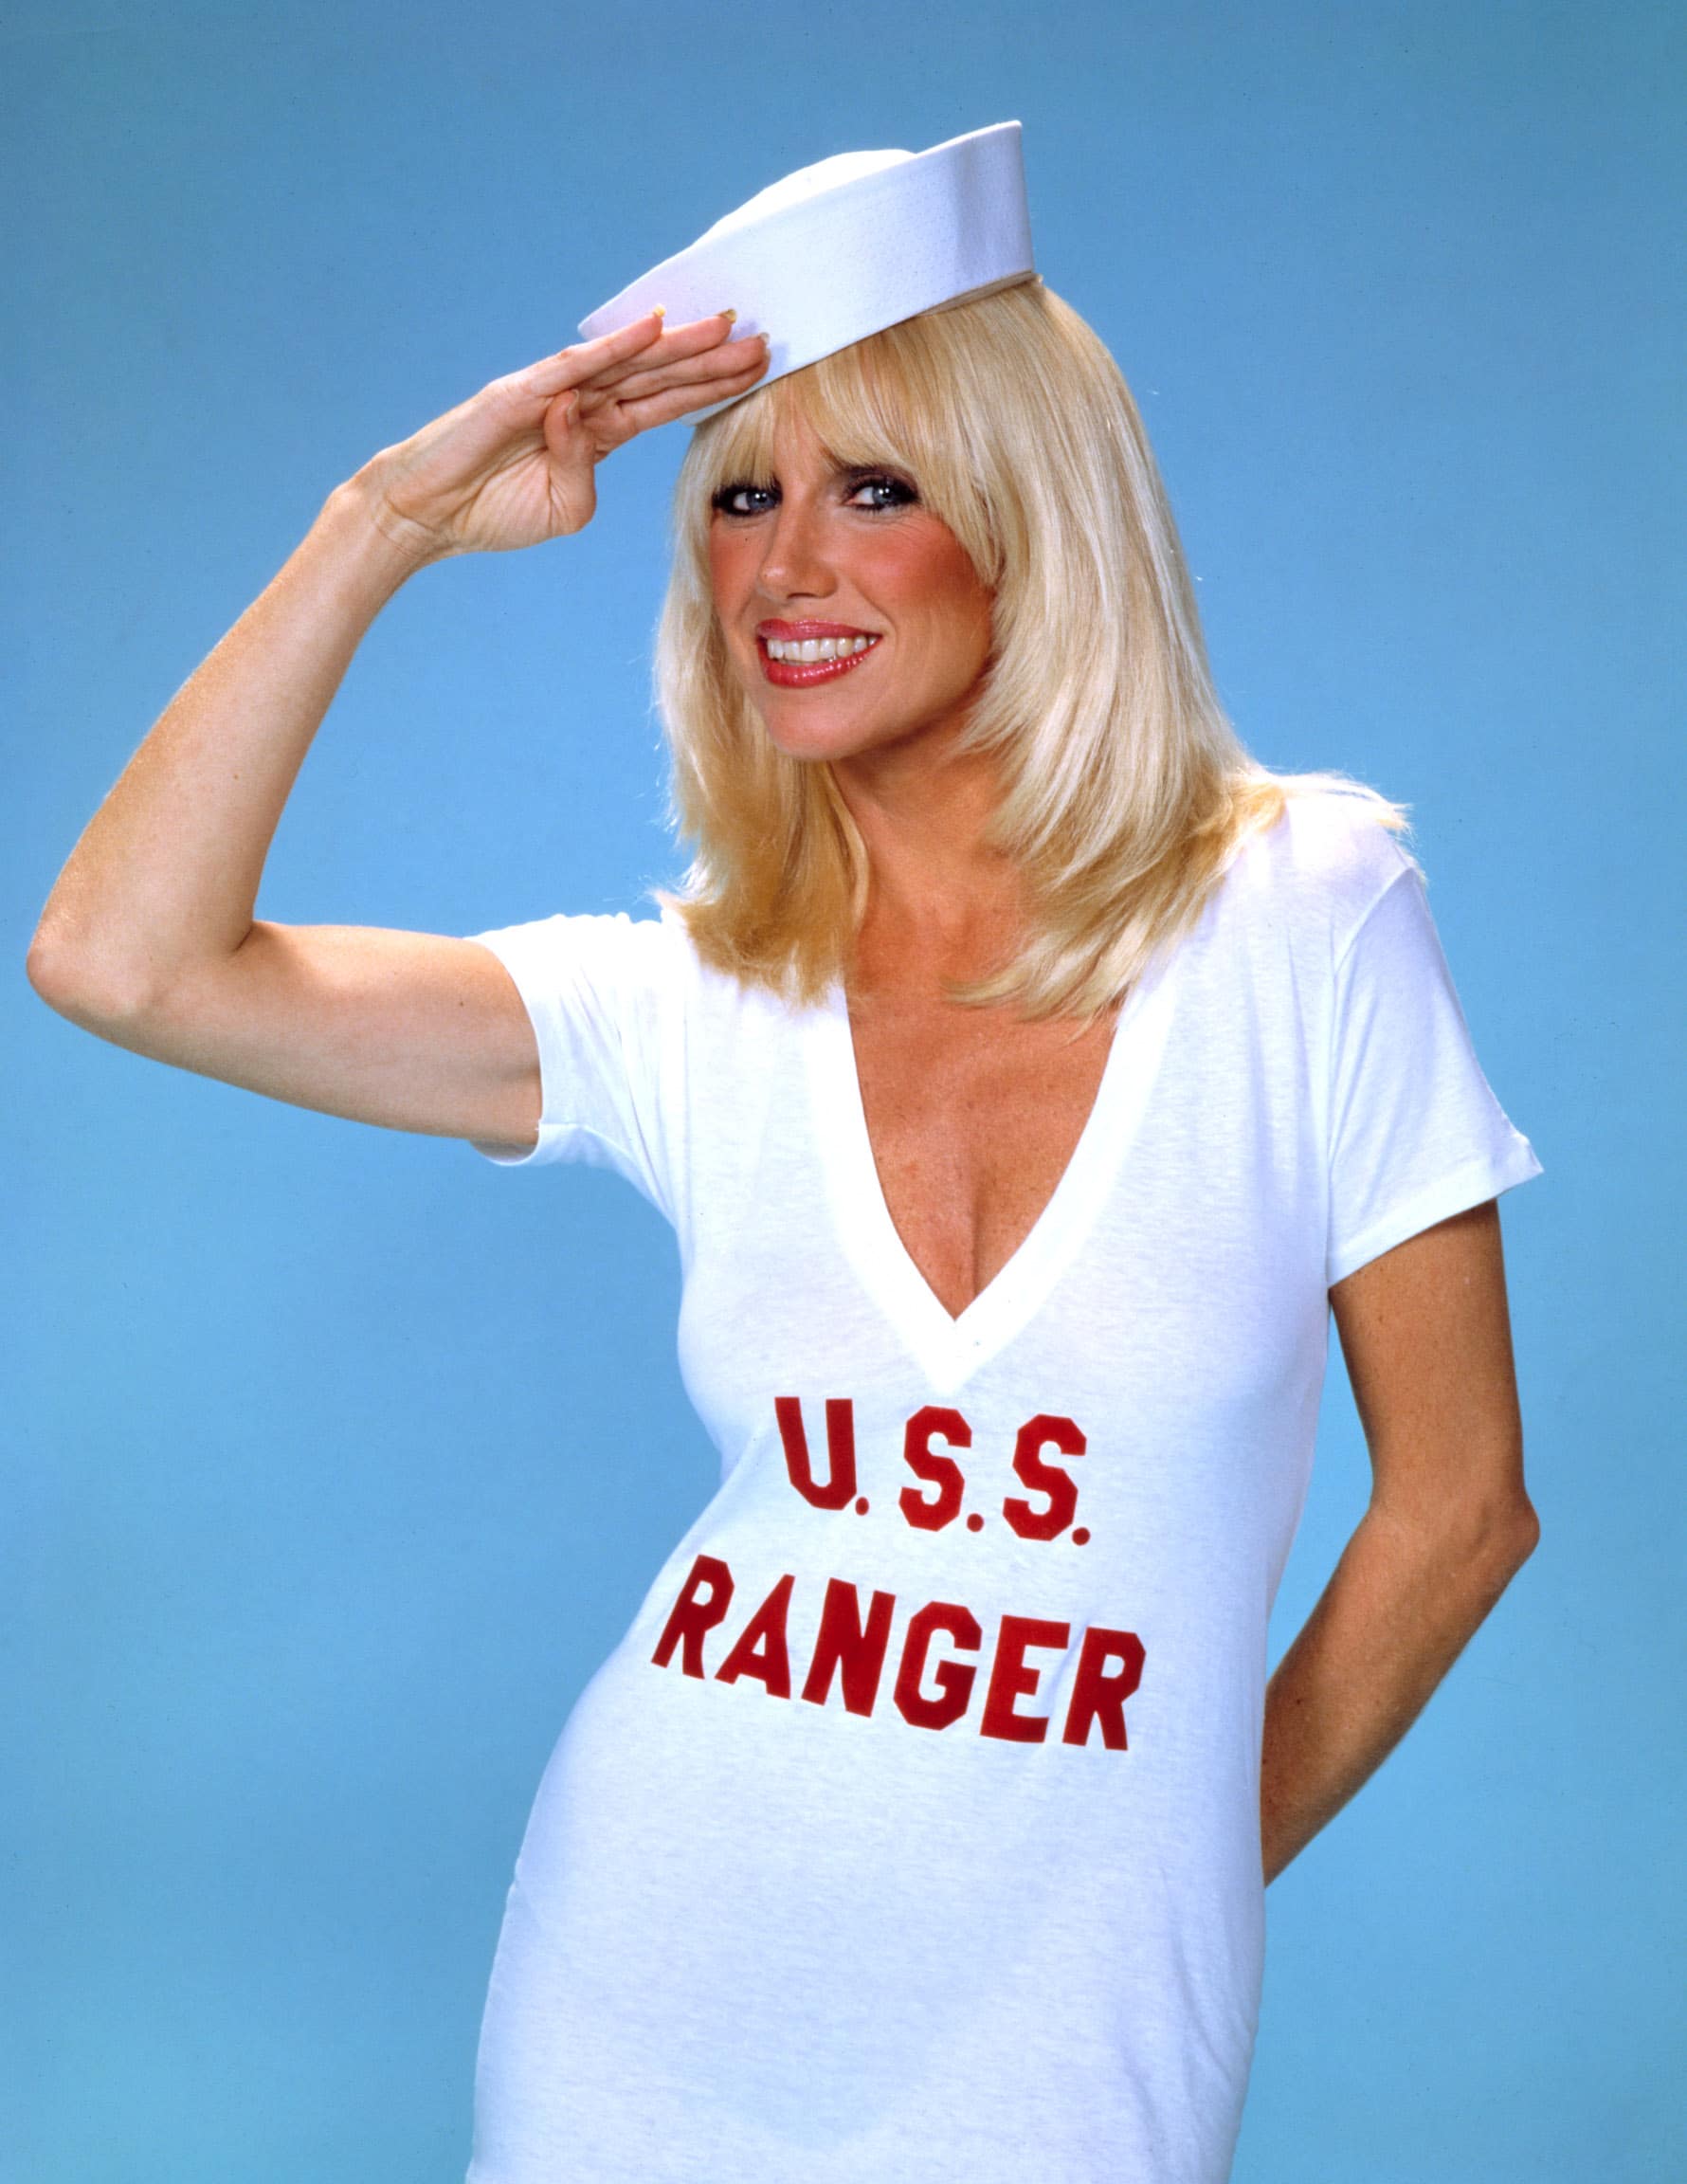 SECOND ANNUAL NATIONAL COLLEGIATE CHEERLEADING CHAMPIONSHIPS, THE, Suzanne Somers, c. 1980s